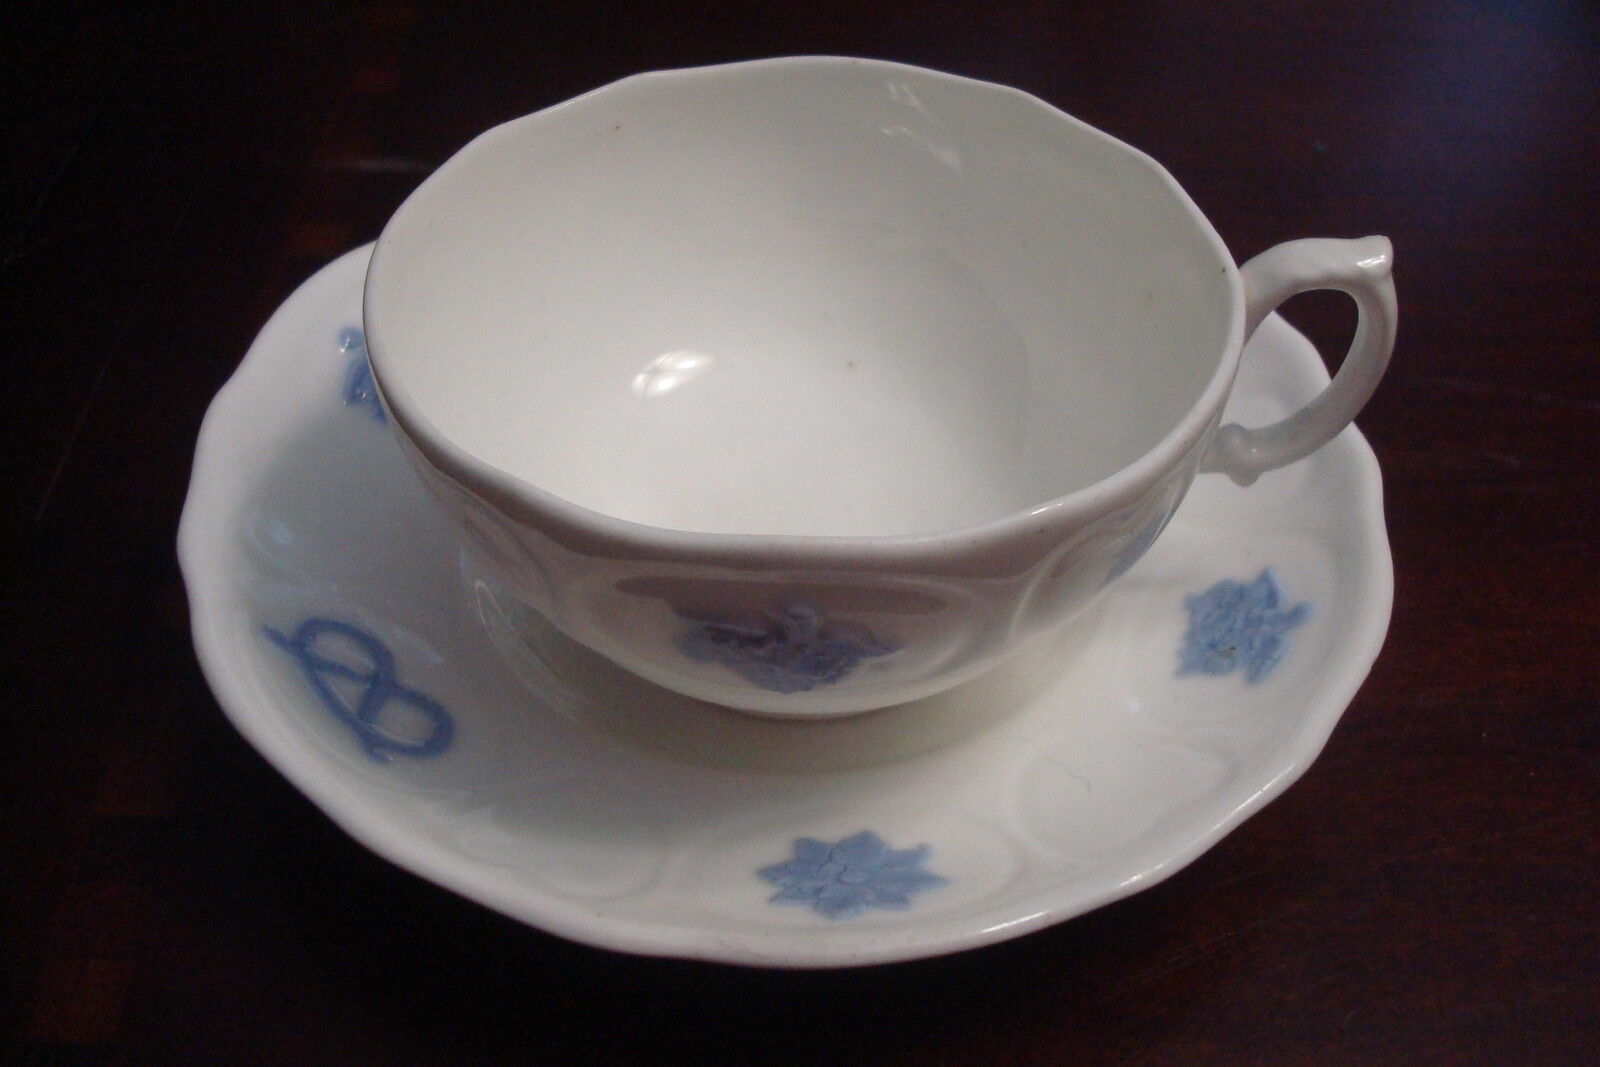 Primary image for Old English cup and saucer white glaze ceramic with light purple relief [89c]